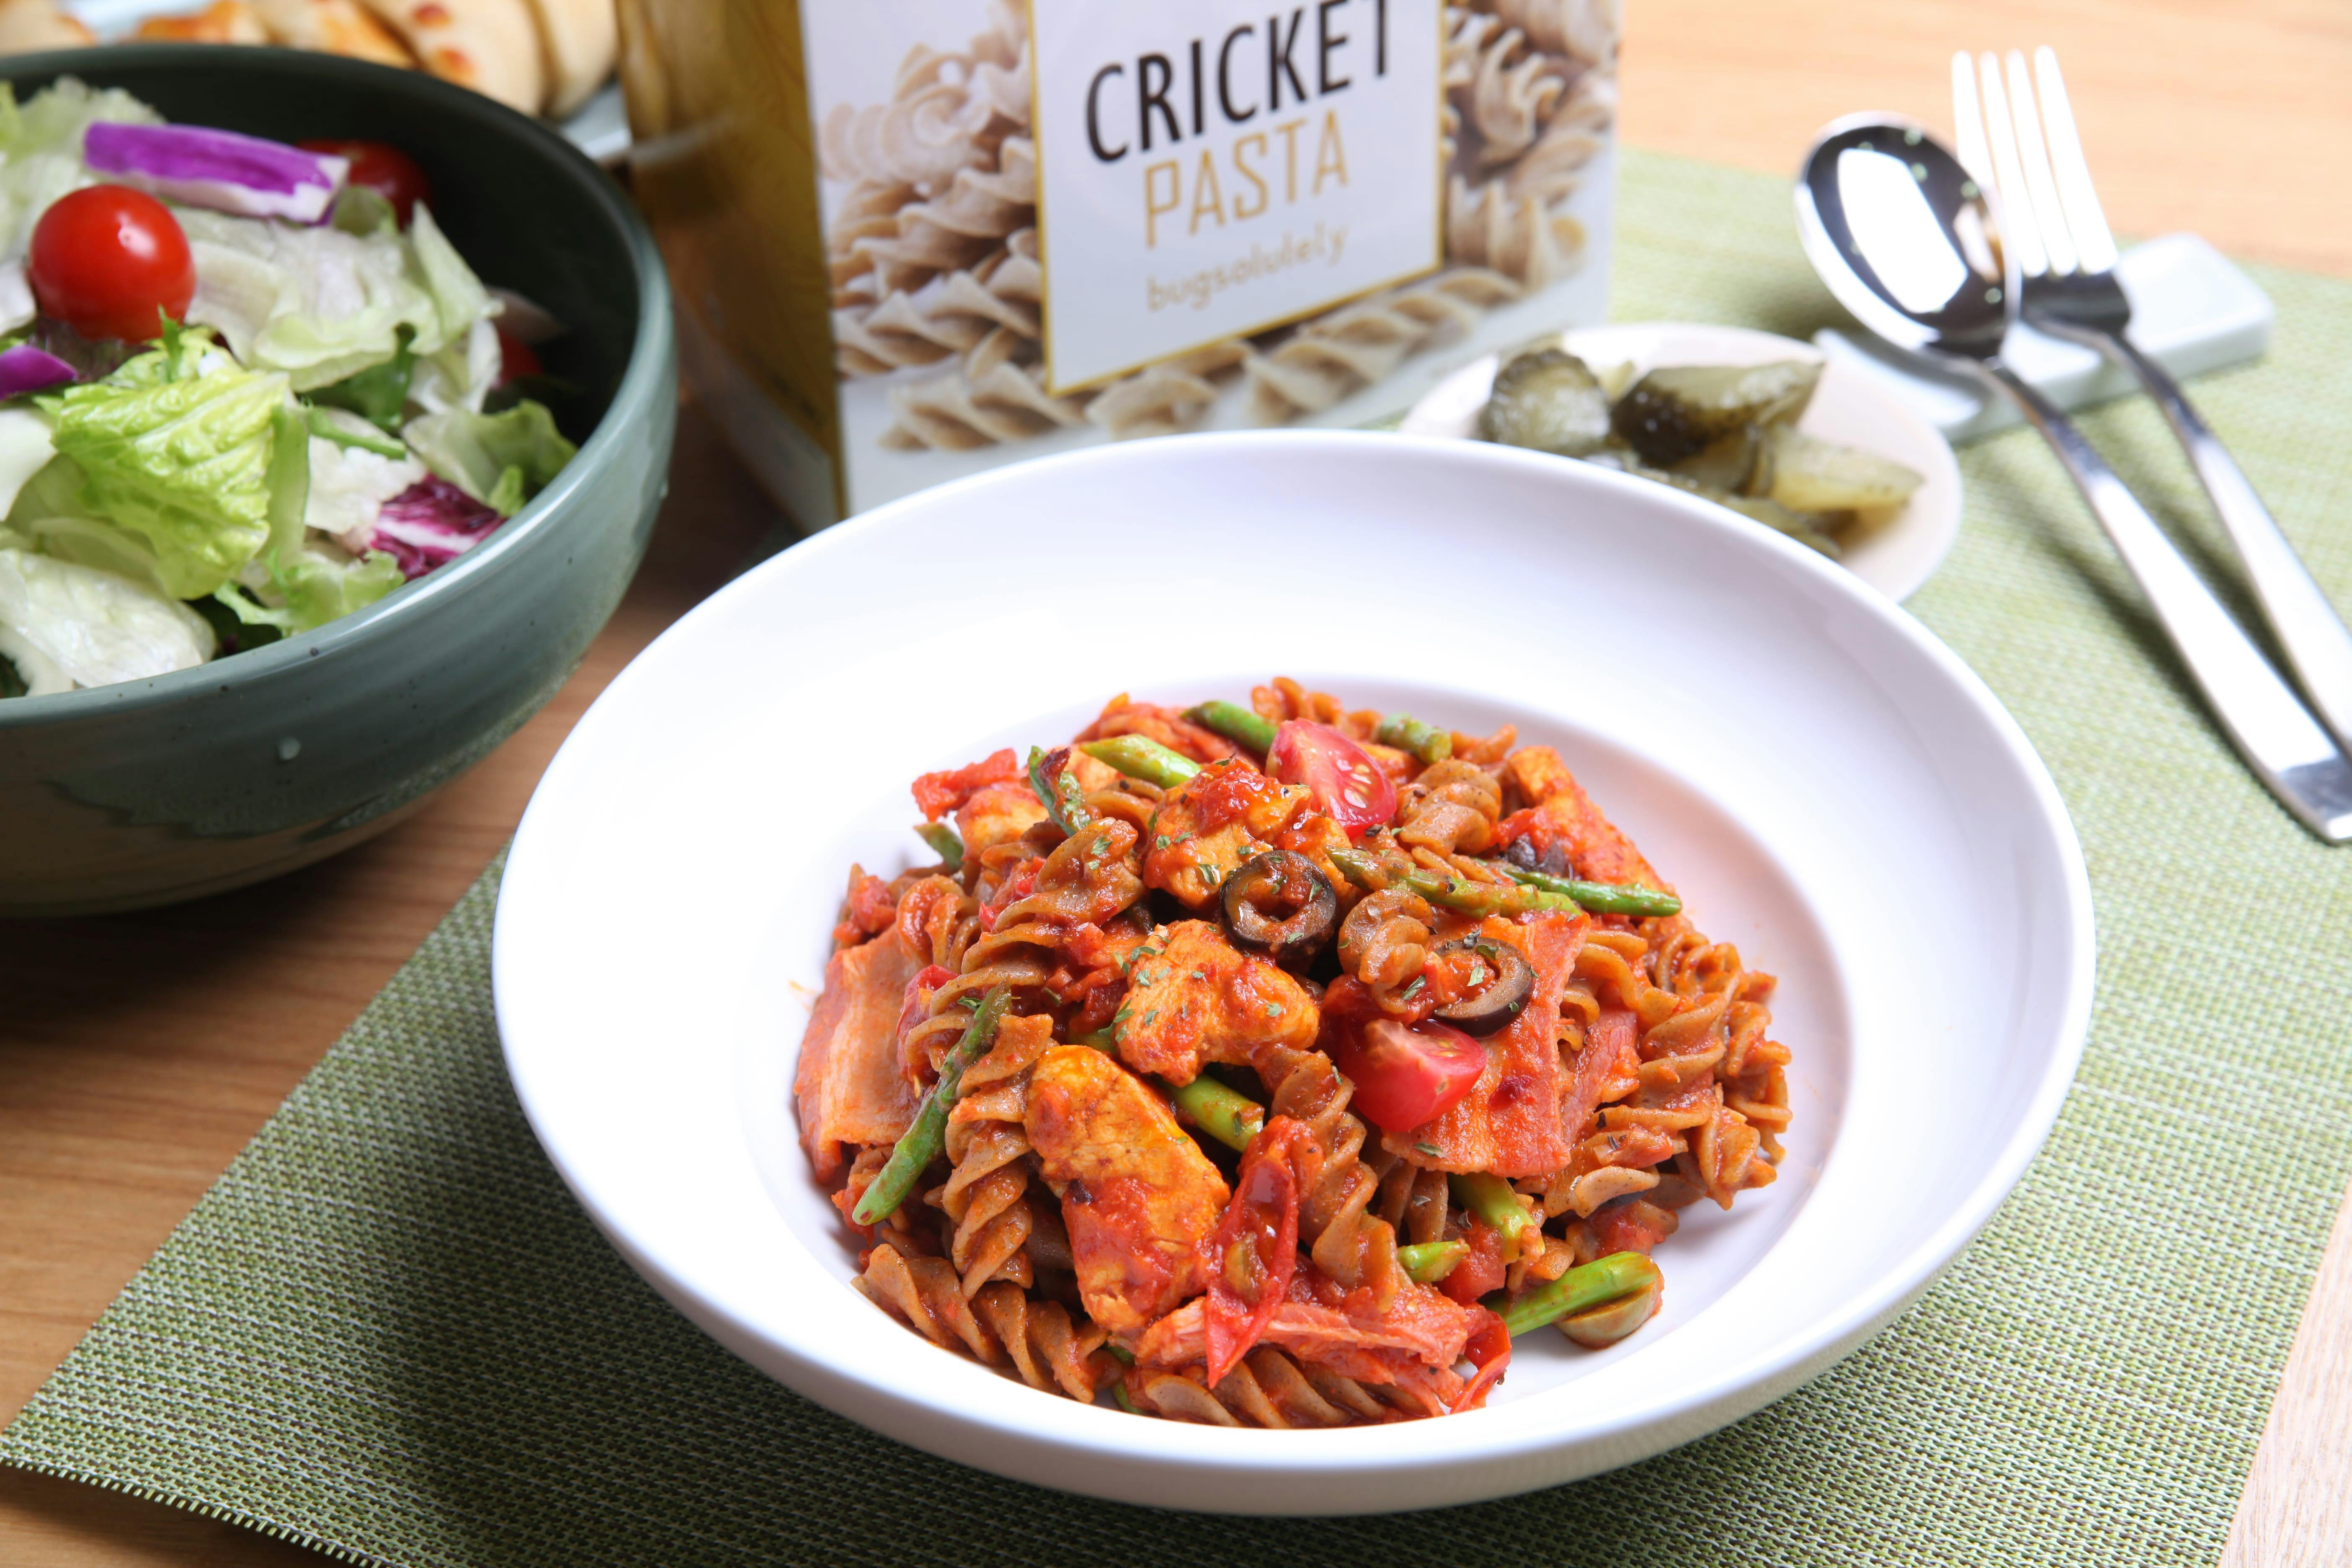 Free stock photo of cricket, cricket pasta, edible insects